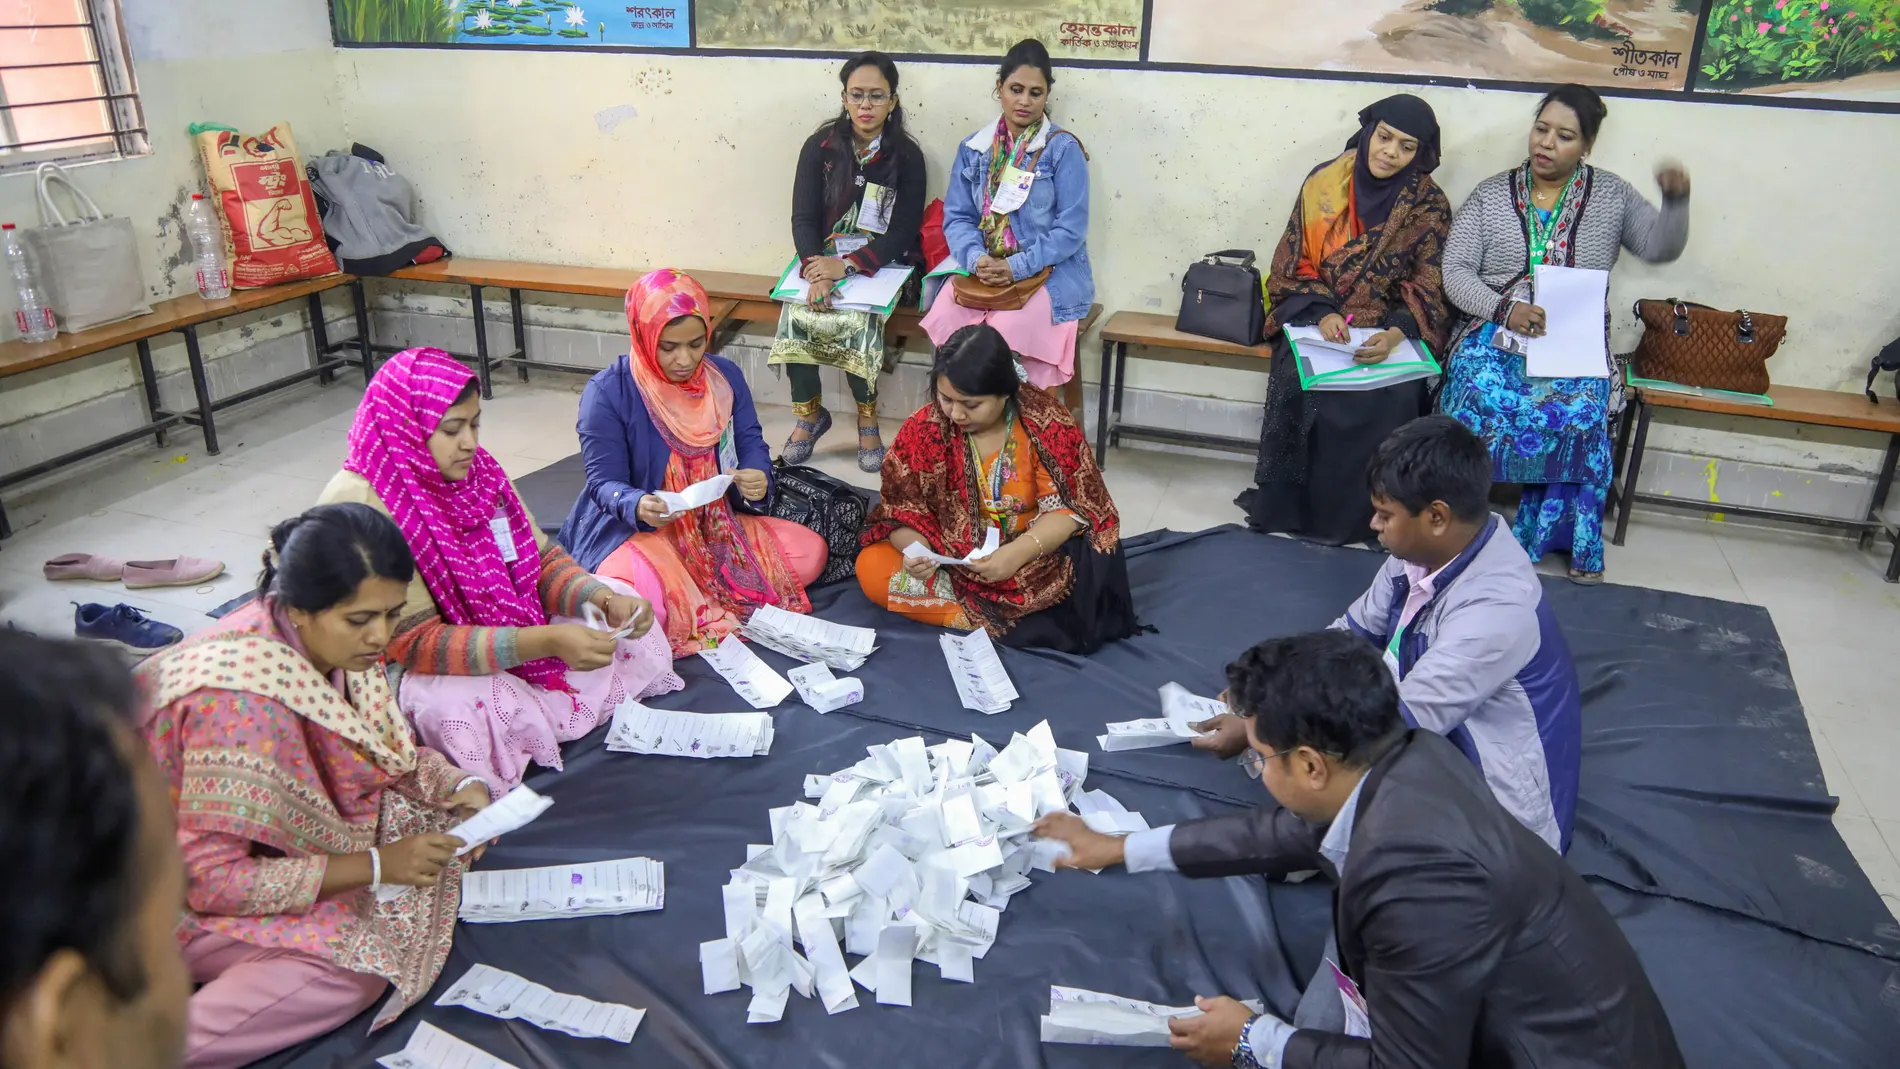 Dhaka (Bangladesh), 07/01/2024.- Bangladesh election officials count ballot papers after the end of the vote at a polling center during the 12th national general election day in Dhaka, Bangladesh, 07 January 2024. The last general election in Bangladesh was held in 2018. People are voting to select members of the national parliament, also known as Jatiya Sangsad. (Elecciones) EFE/EPA/MONIRUL ALAM 